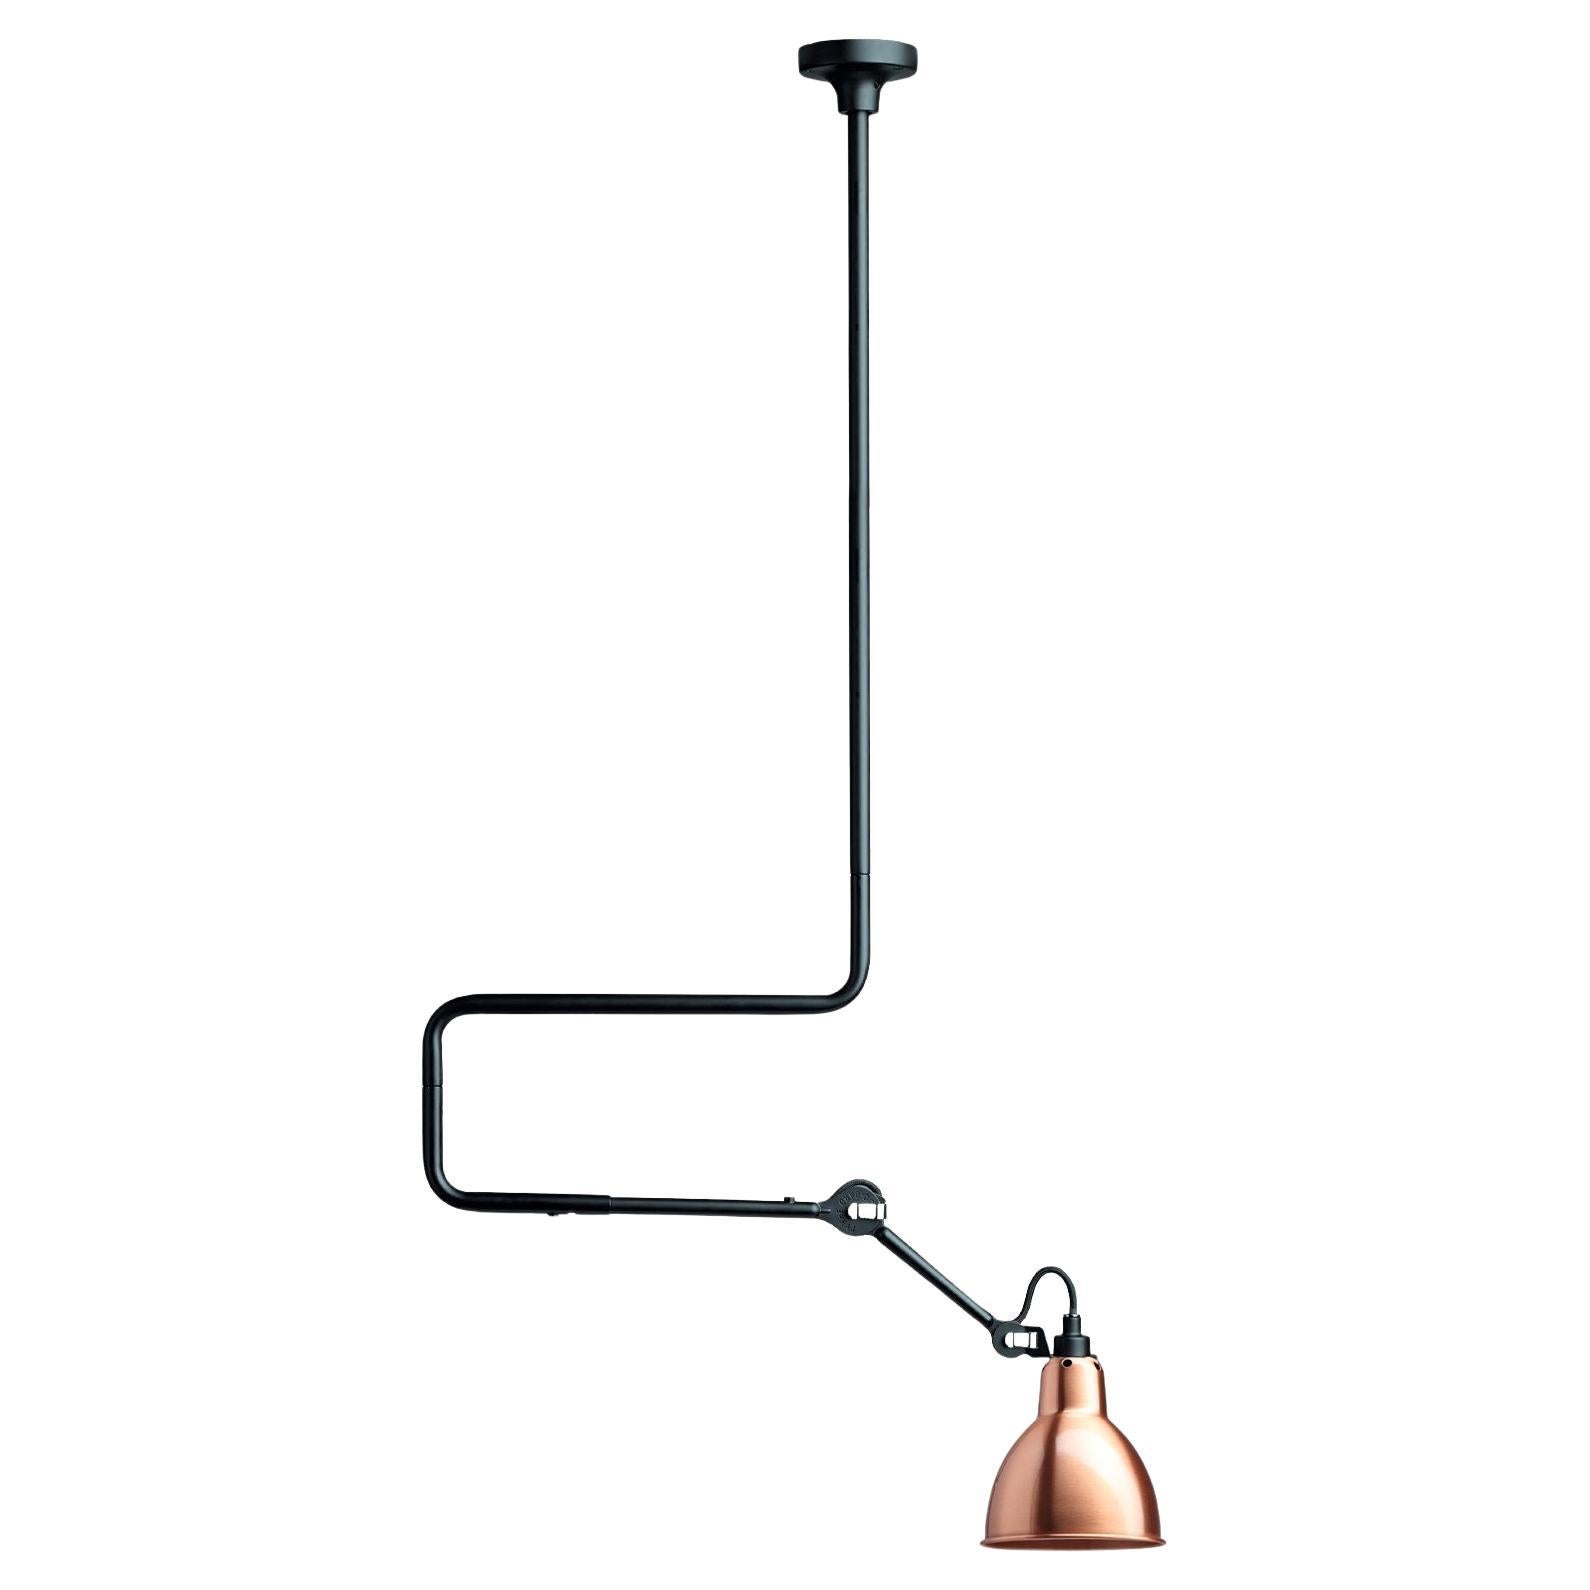 DCW Editions La Lampe Gras N°312 Pendant Lamp w/Extension in Copper Shade